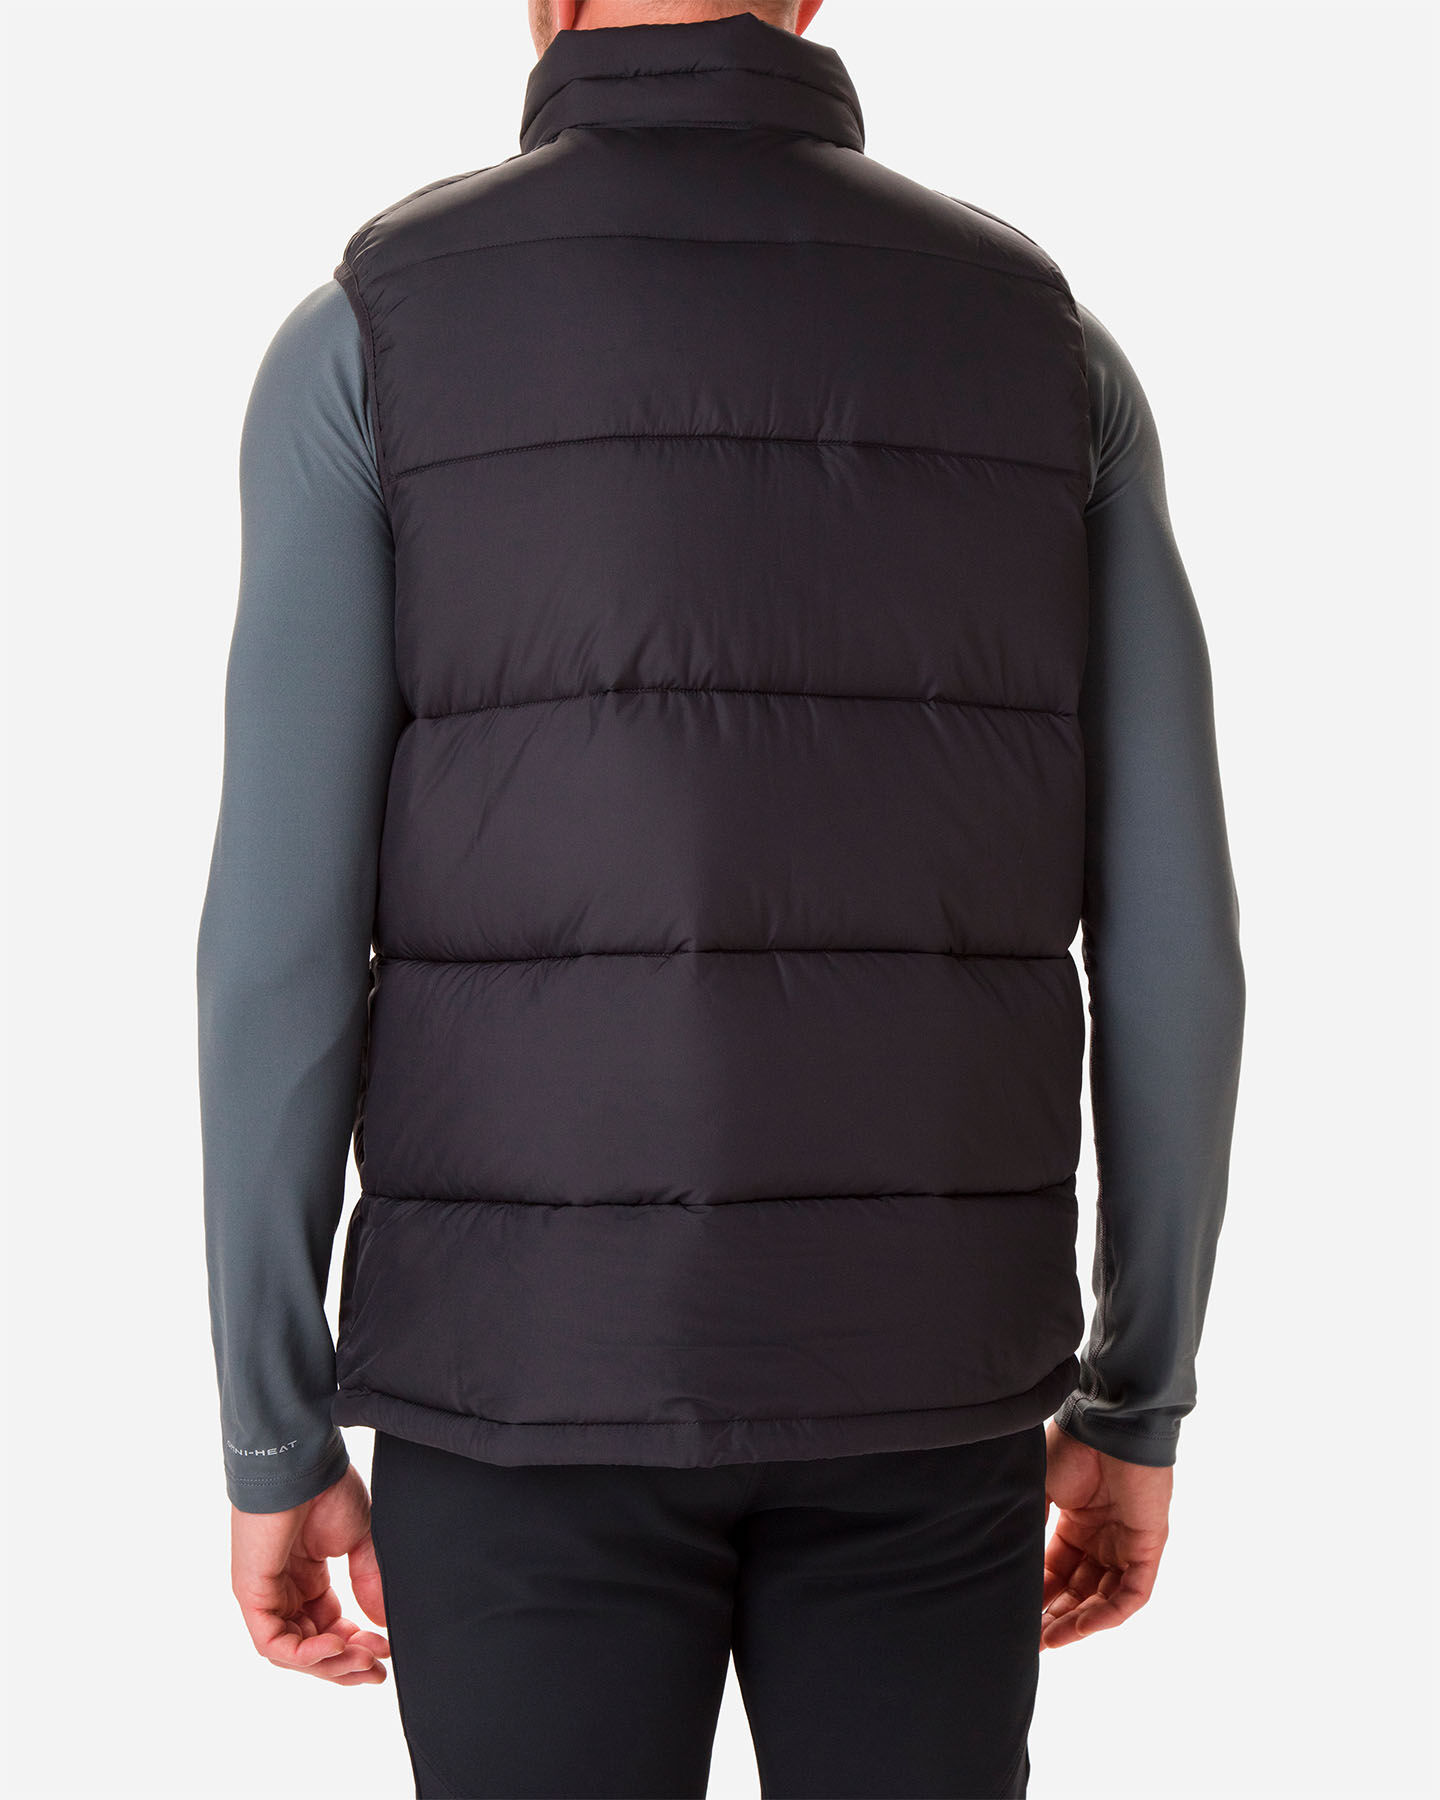  Gilet COLUMBIA PIKE LAKE M S5020396|012|S scatto 3